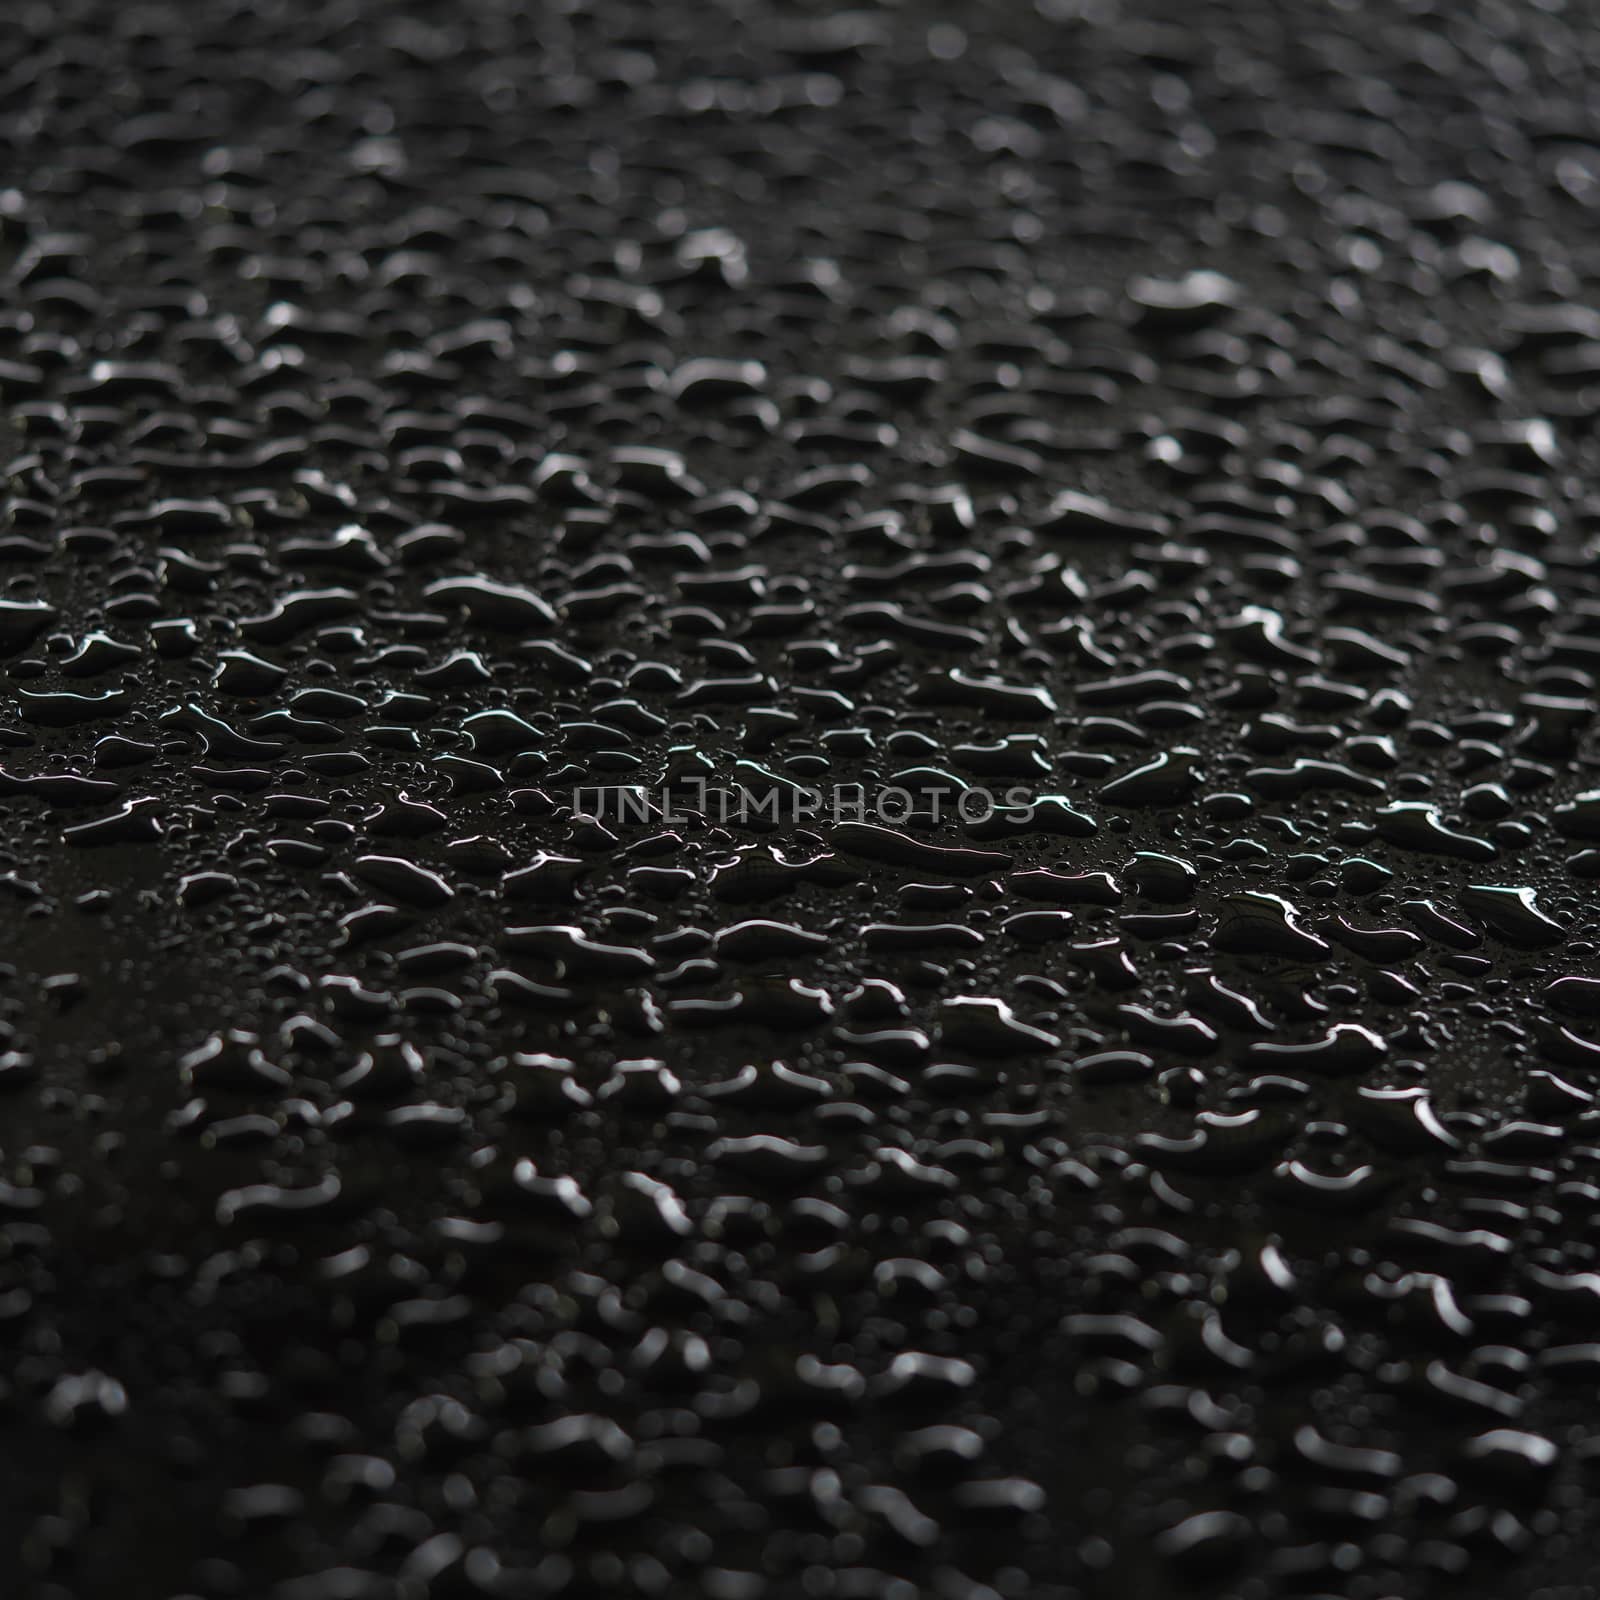 Abstract raindrops clinging to the surface of the car, black background.